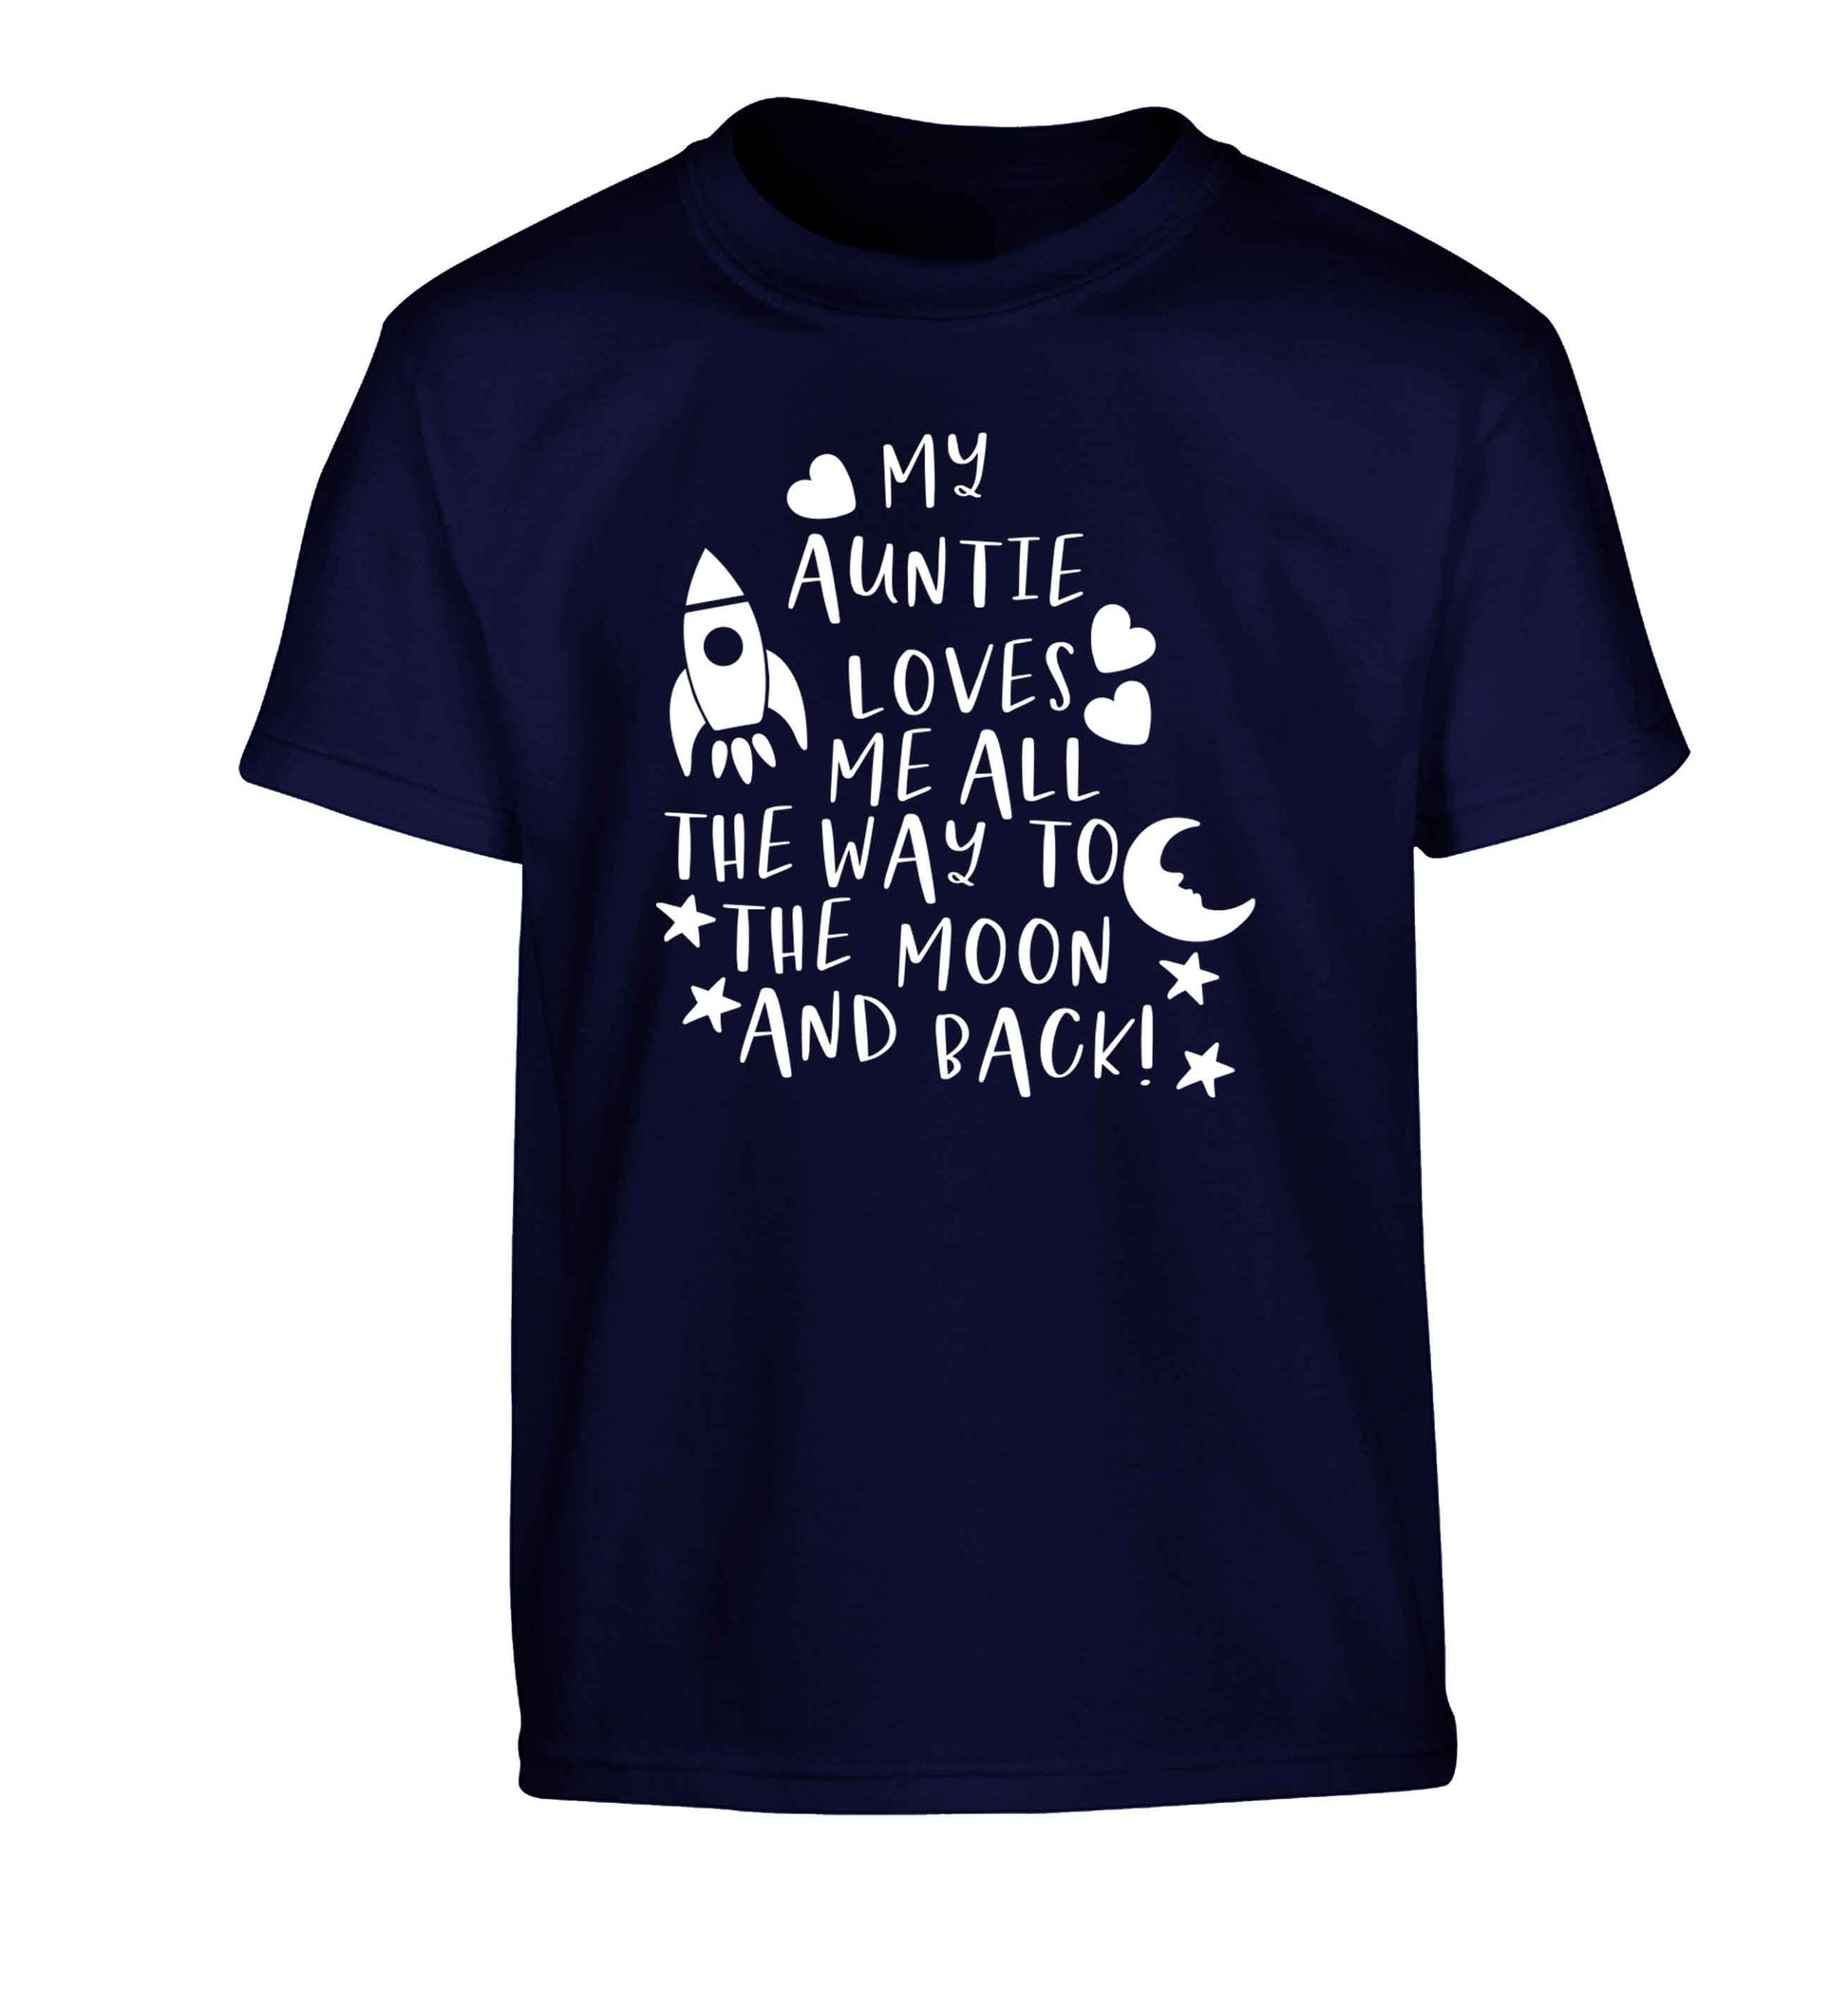 My auntie loves me all the way to the moon and back Children's navy Tshirt 12-13 Years